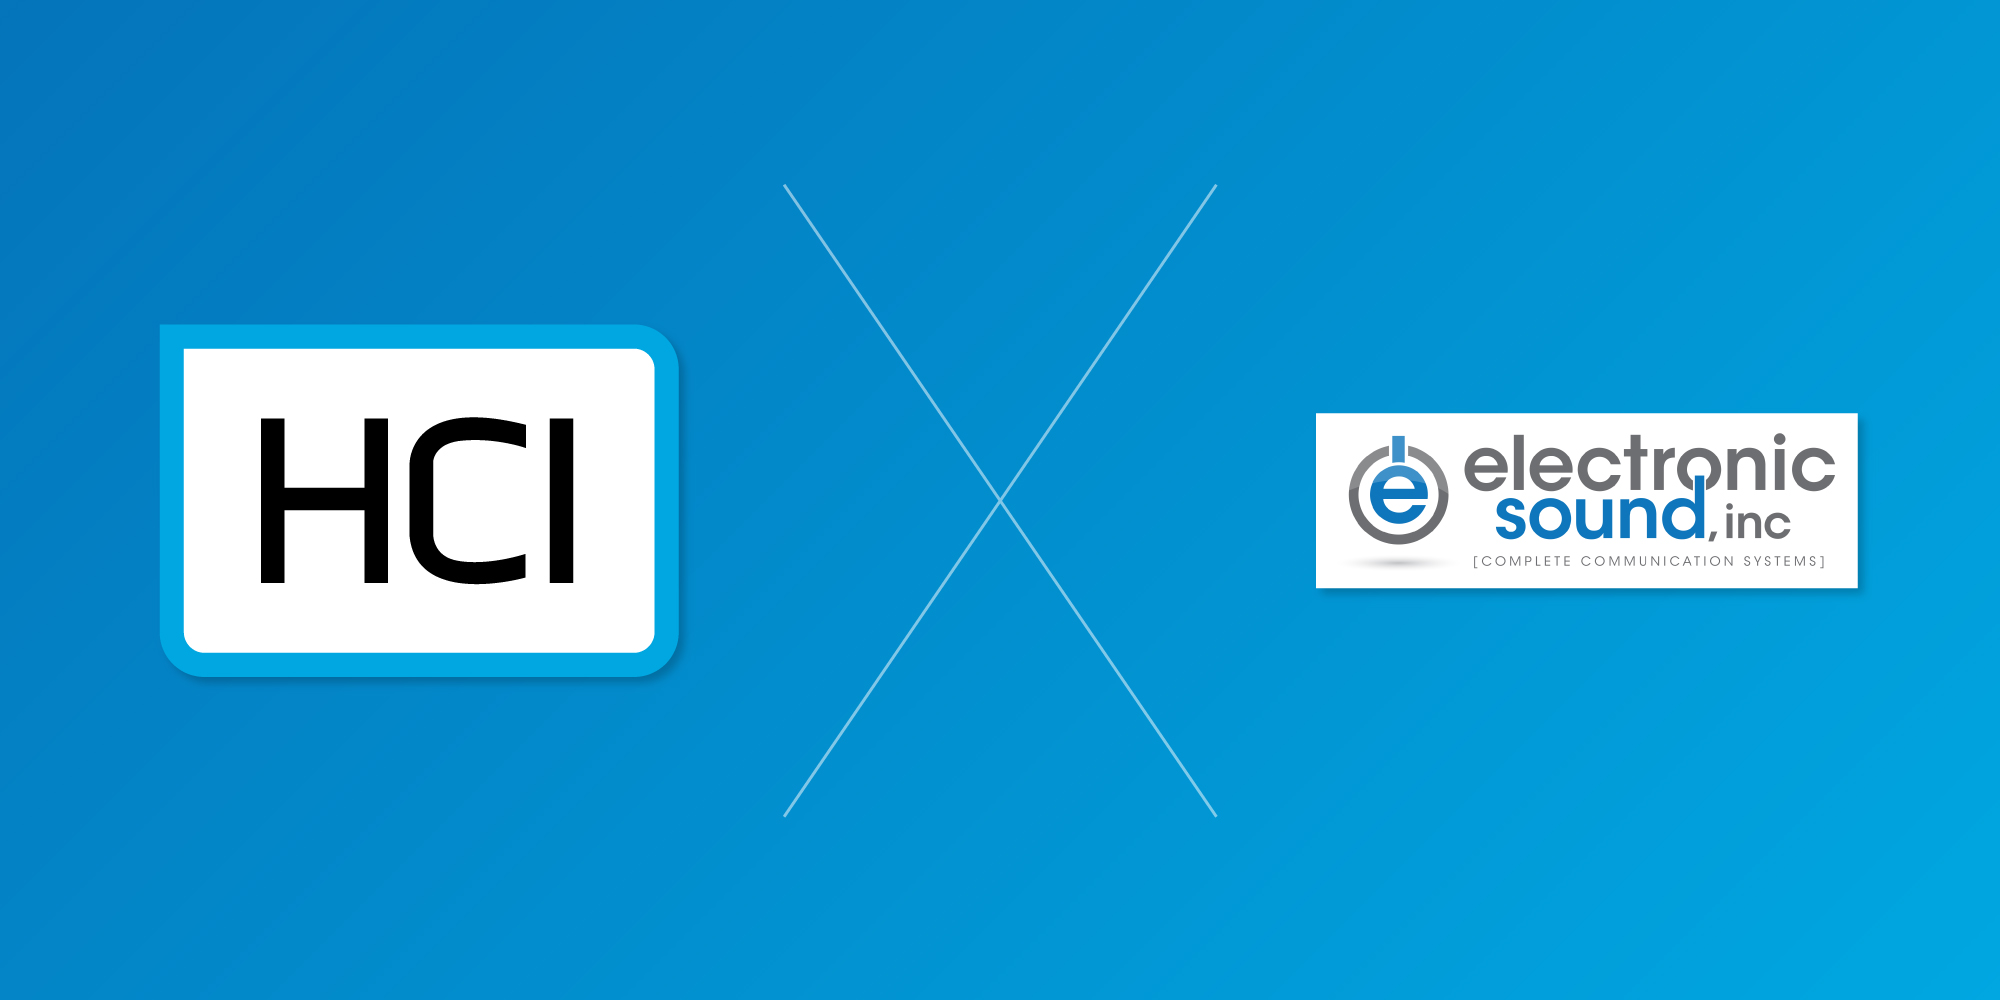 Electronic Sound partners with HCI